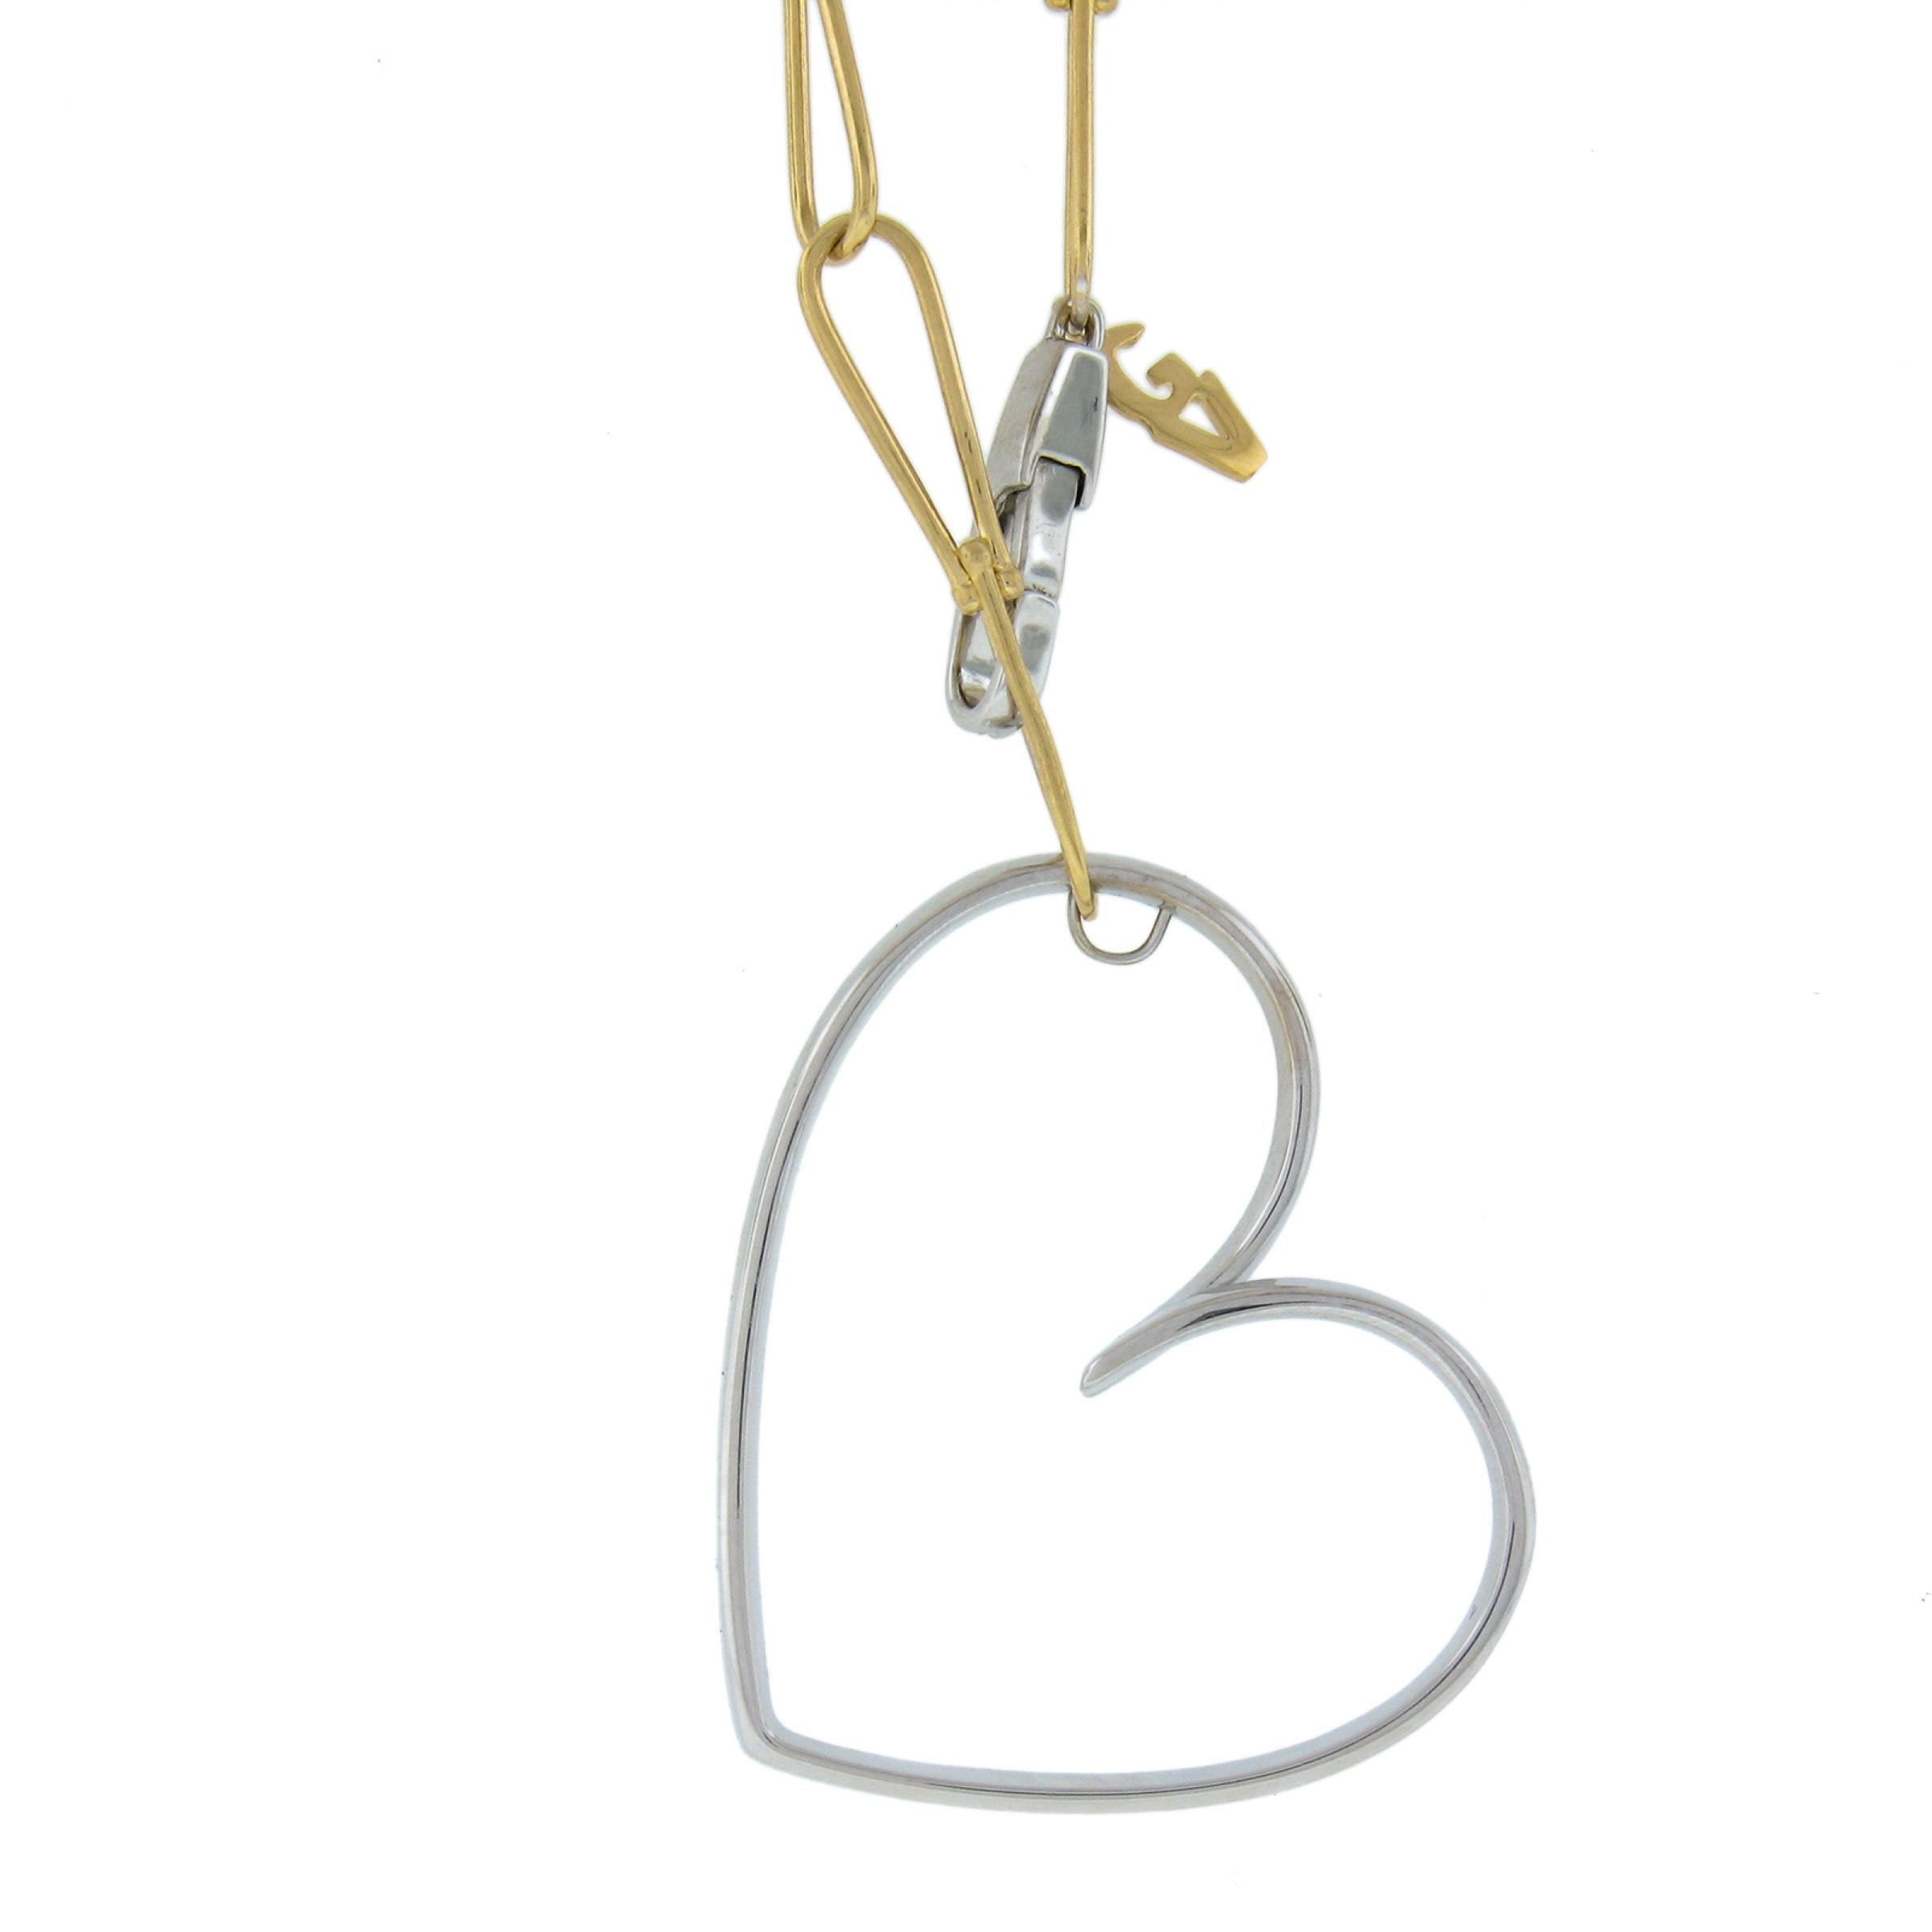 This gorgeous and very unique lariat necklace by Giorgio Visconti is crafted in Italy from solid 18k yellow gold with a large white gold diamond heart and clasp. This chain features fine and wide open infinity link design that allows the wearer to